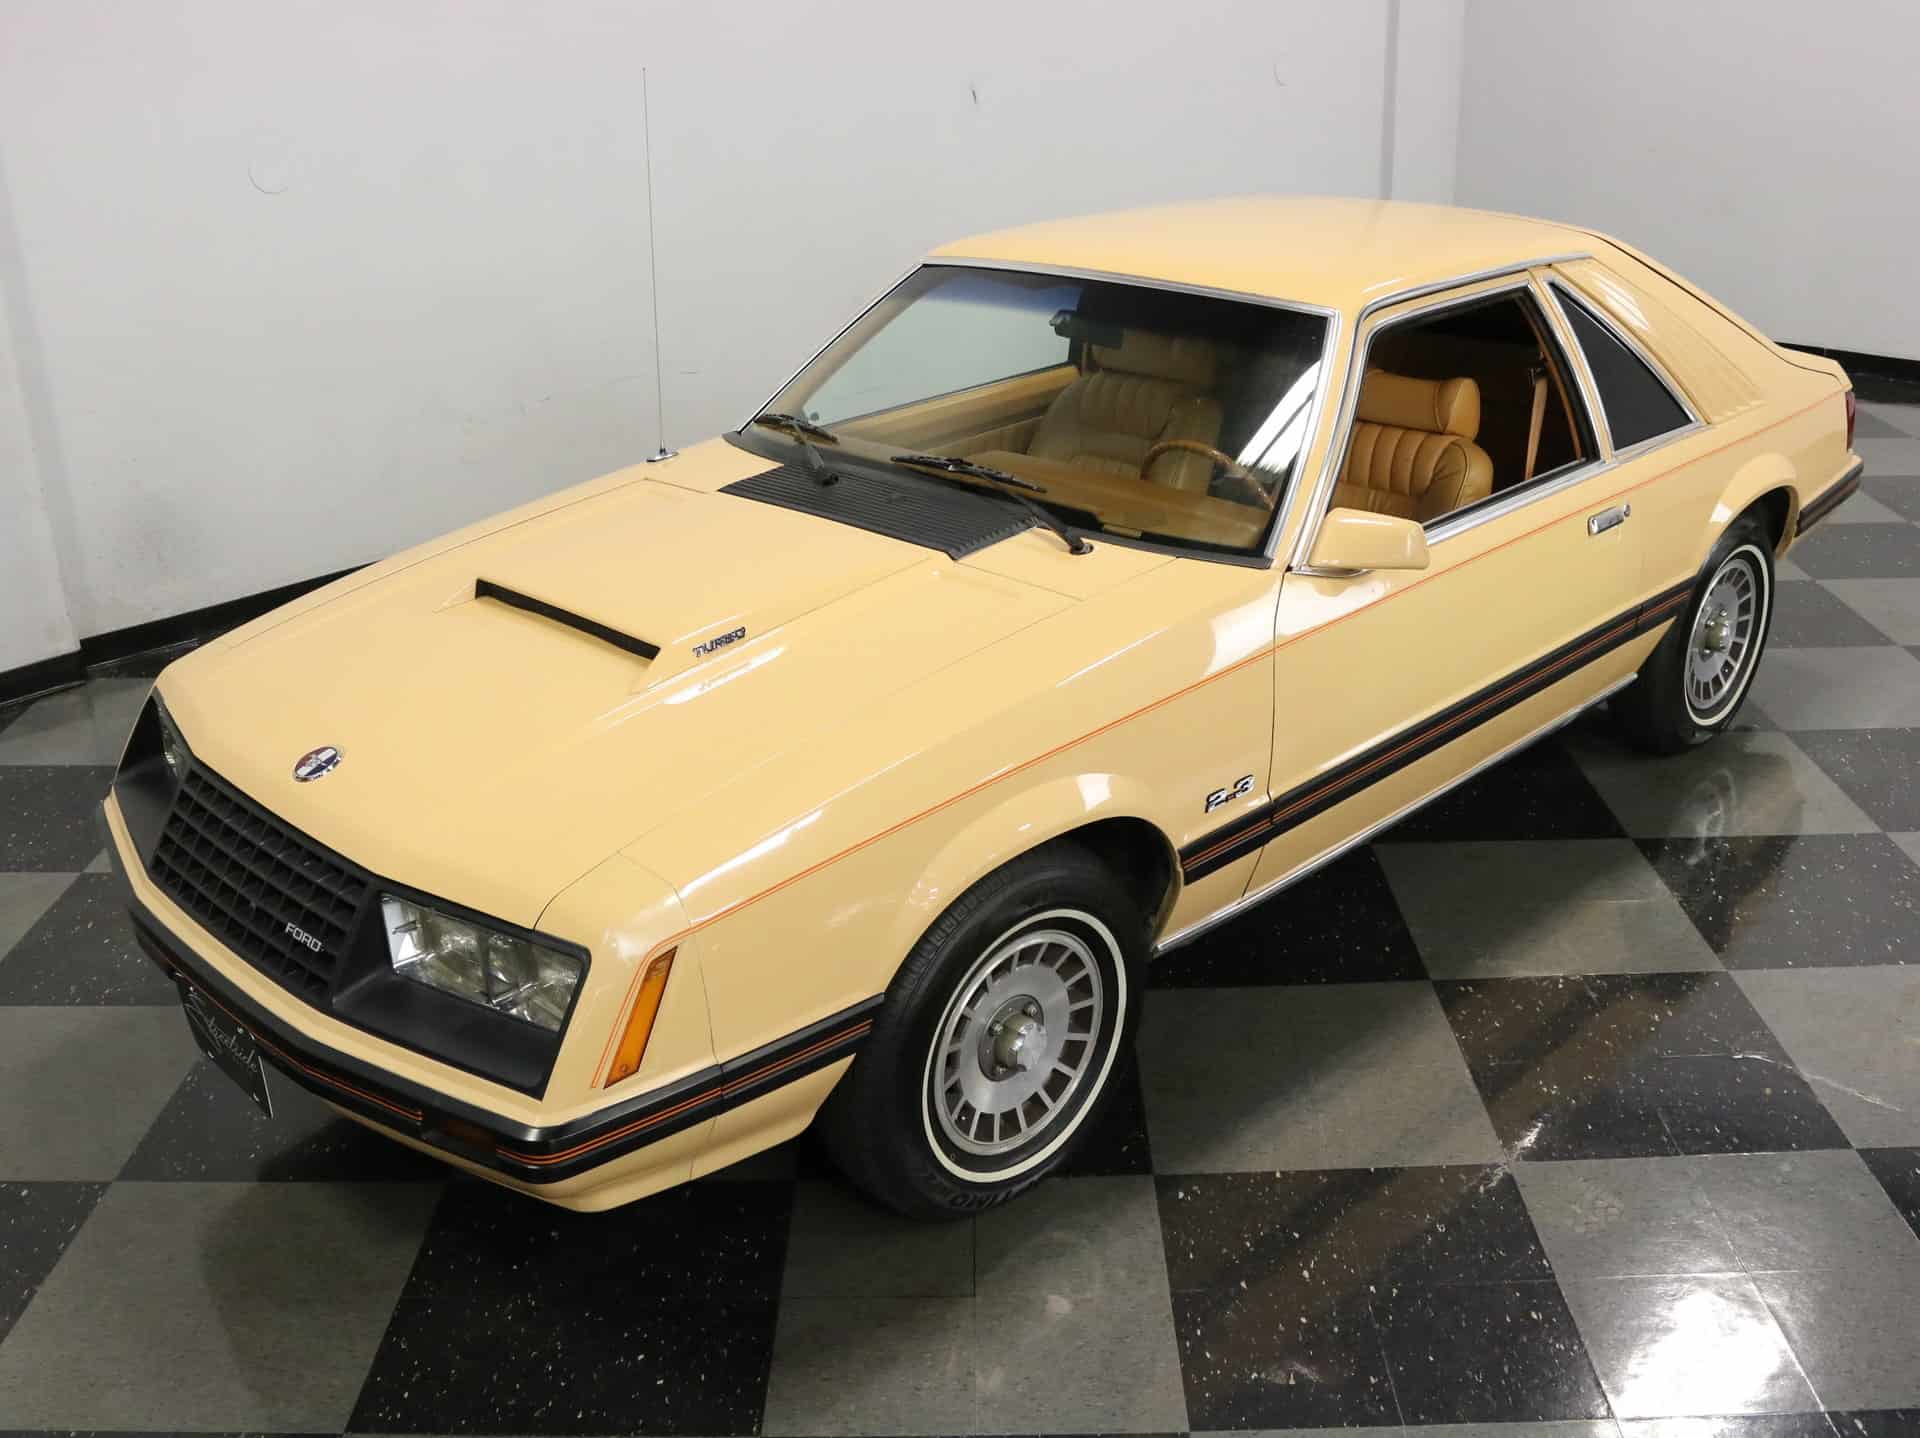 1979 Ford Mustang Turbo Engine 2.3 Modify